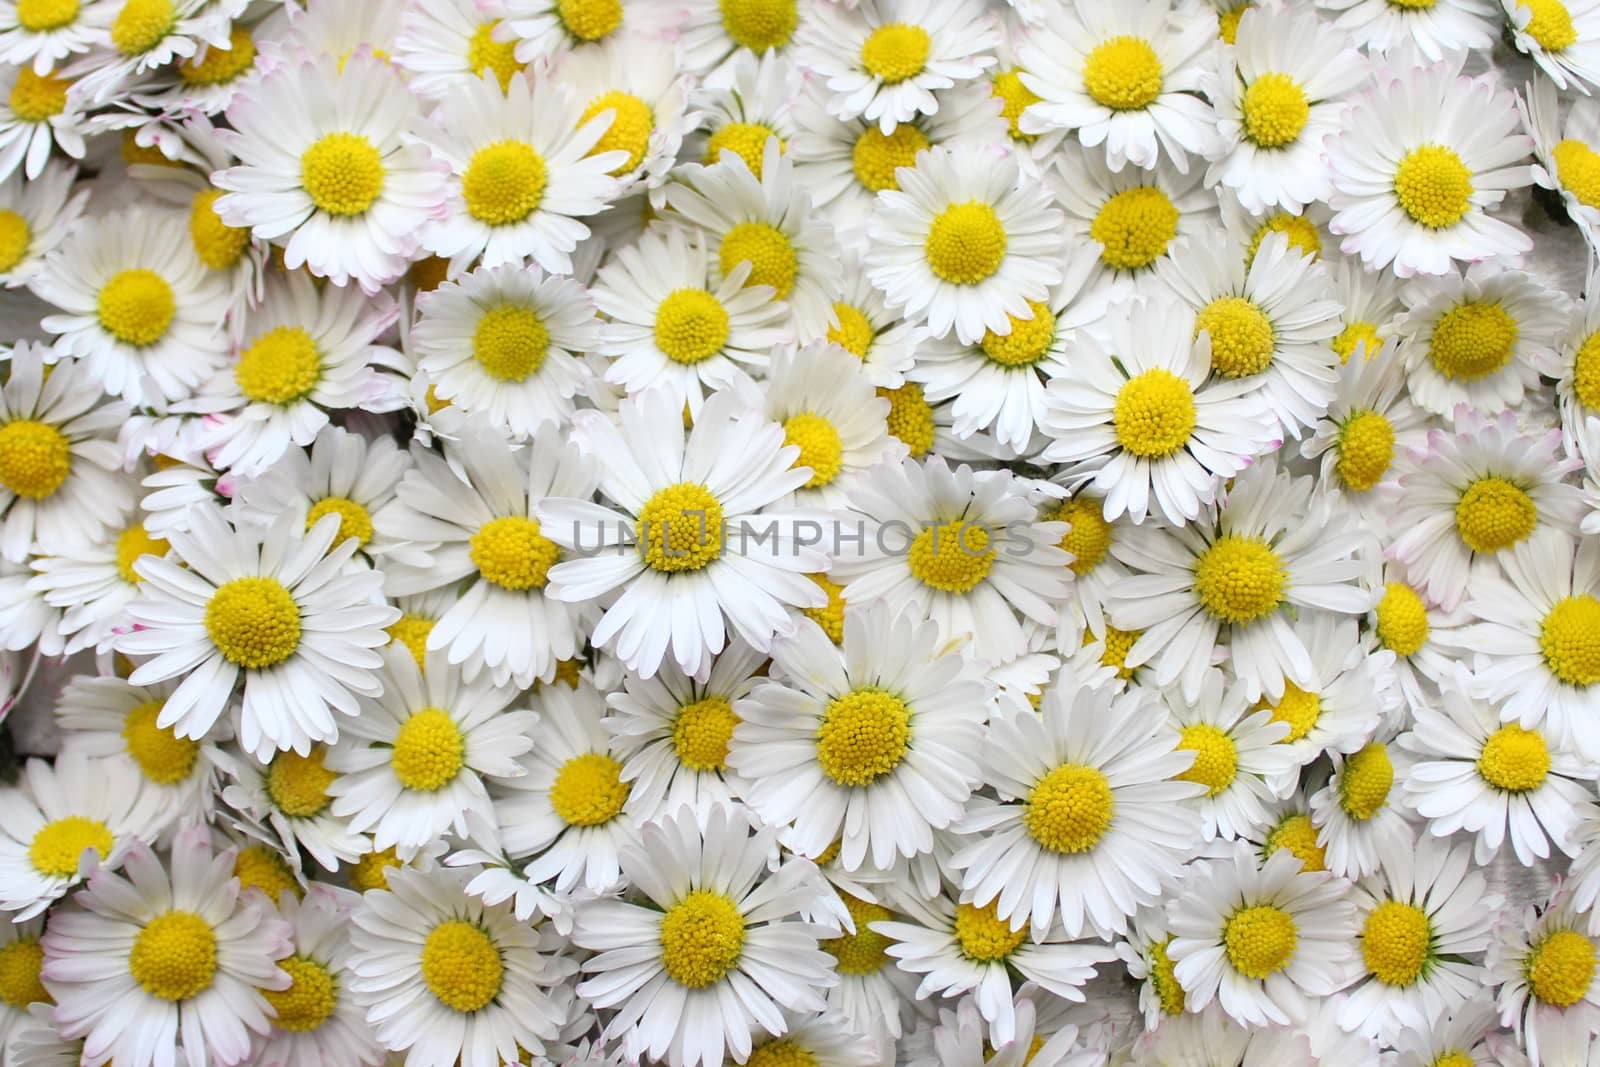 The picture shows a background with many daisy flowers.